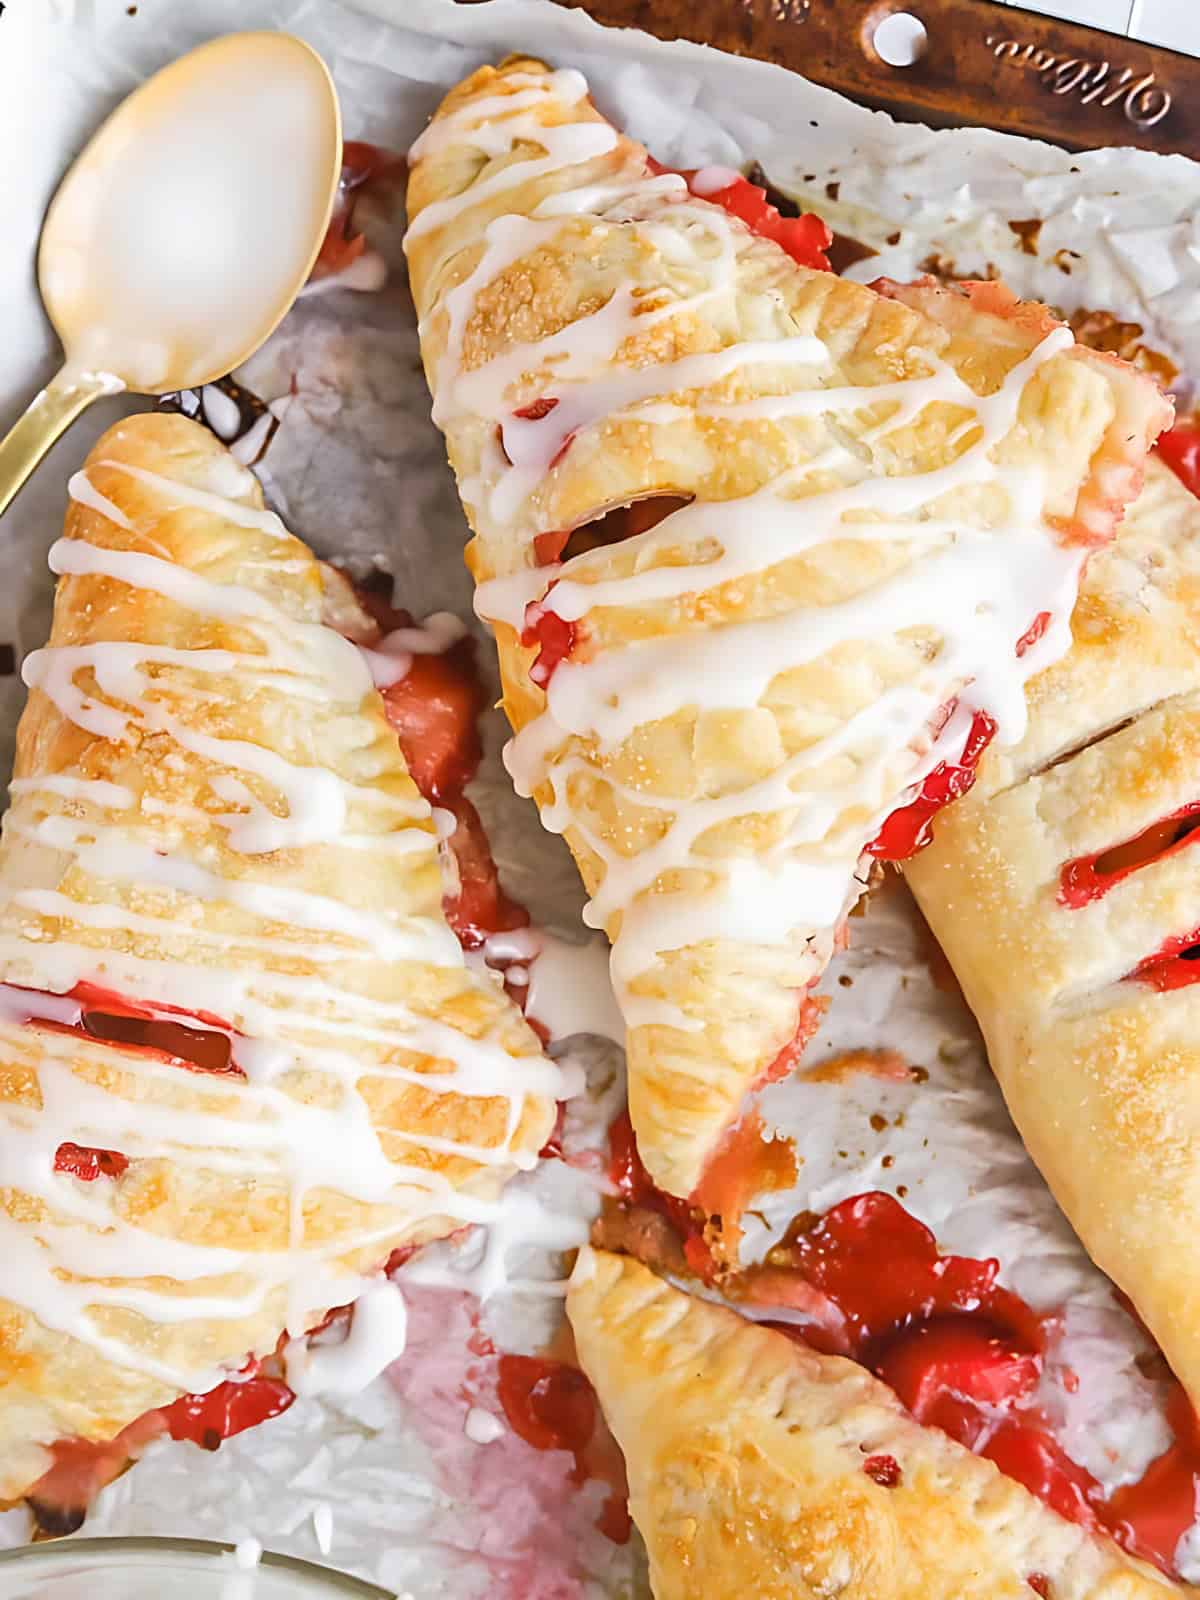 Strawberry rhubarb hand pies drizzled with melted sugar cream.